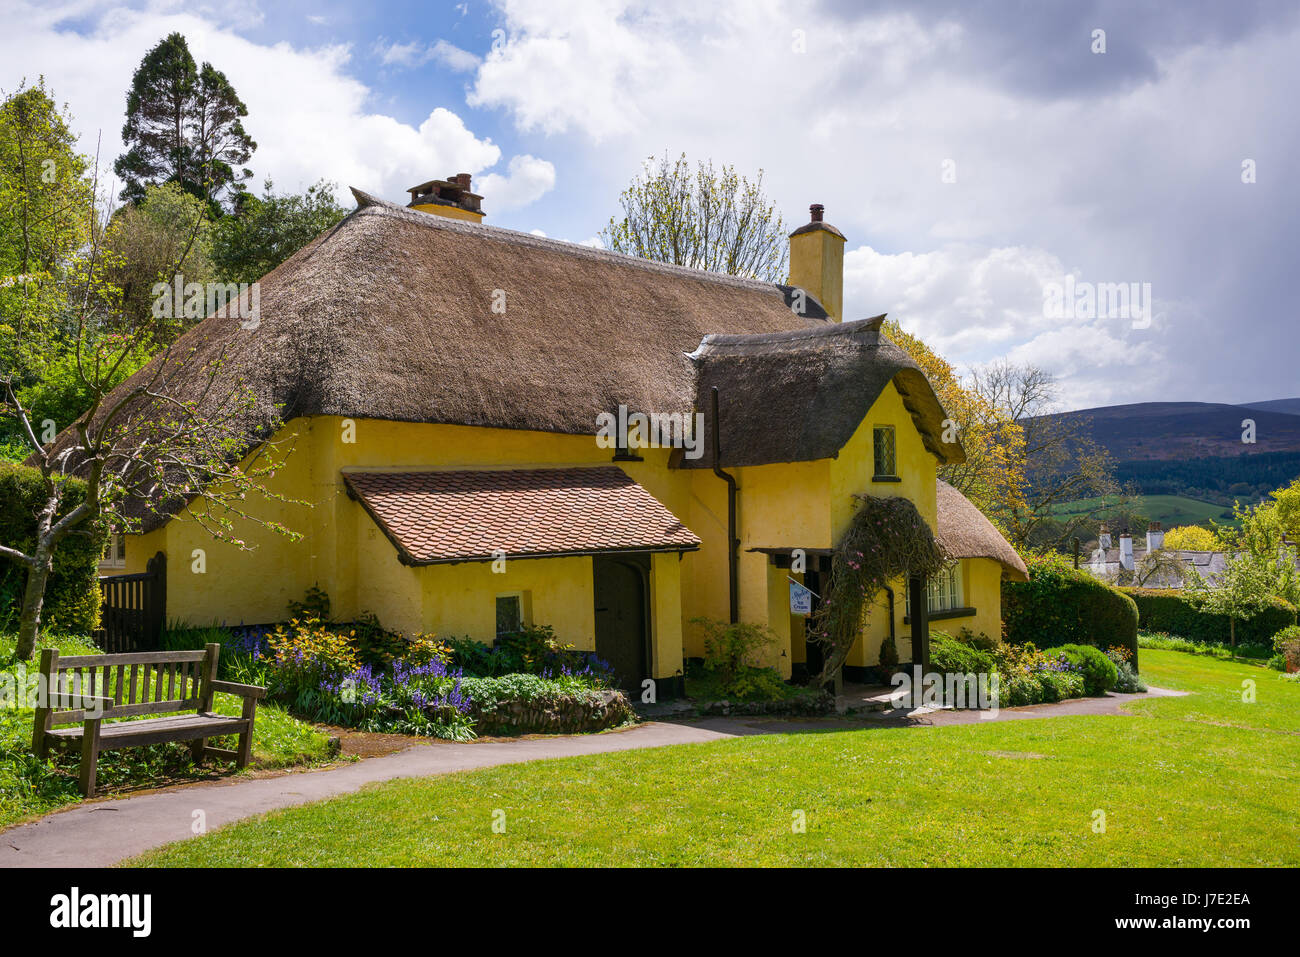 The National Trust village of Selworthy in Exmoor National Park, Somerset, England. Stock Photo